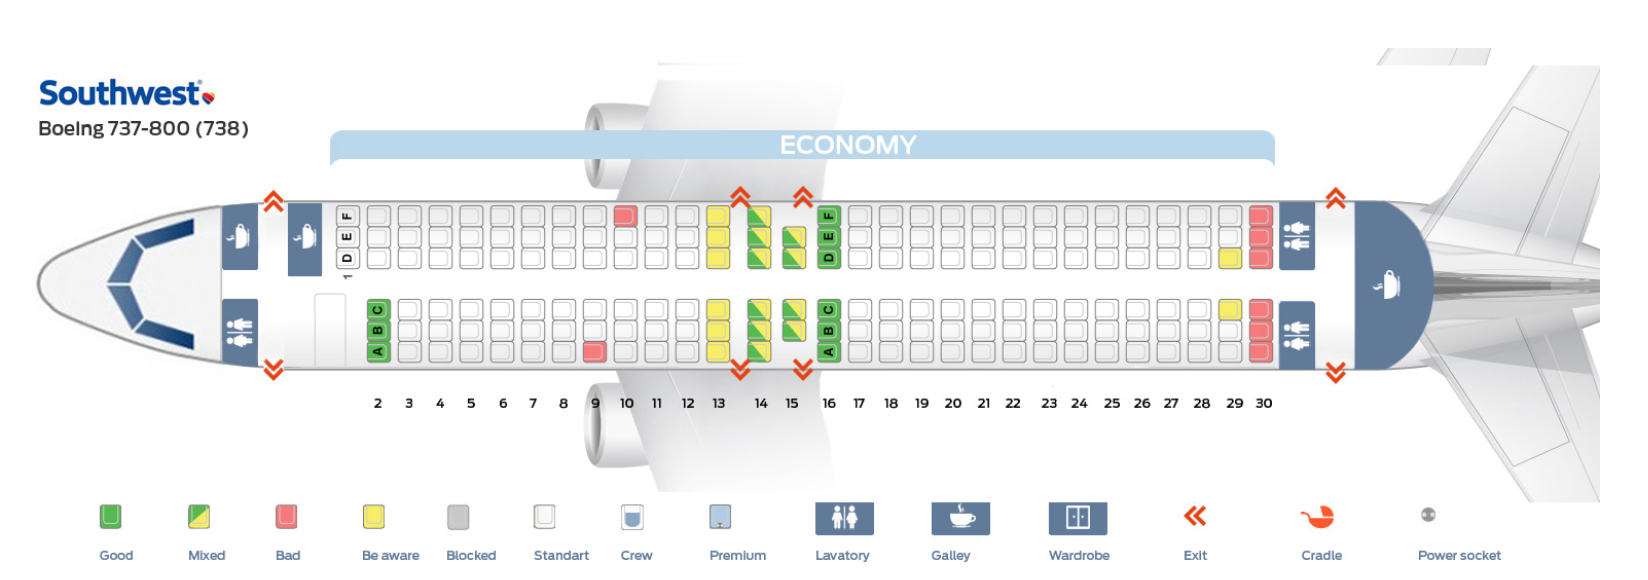 Southwest Flight Seating Chart The Best Seats When Flying On Southwest Airlines [2021]